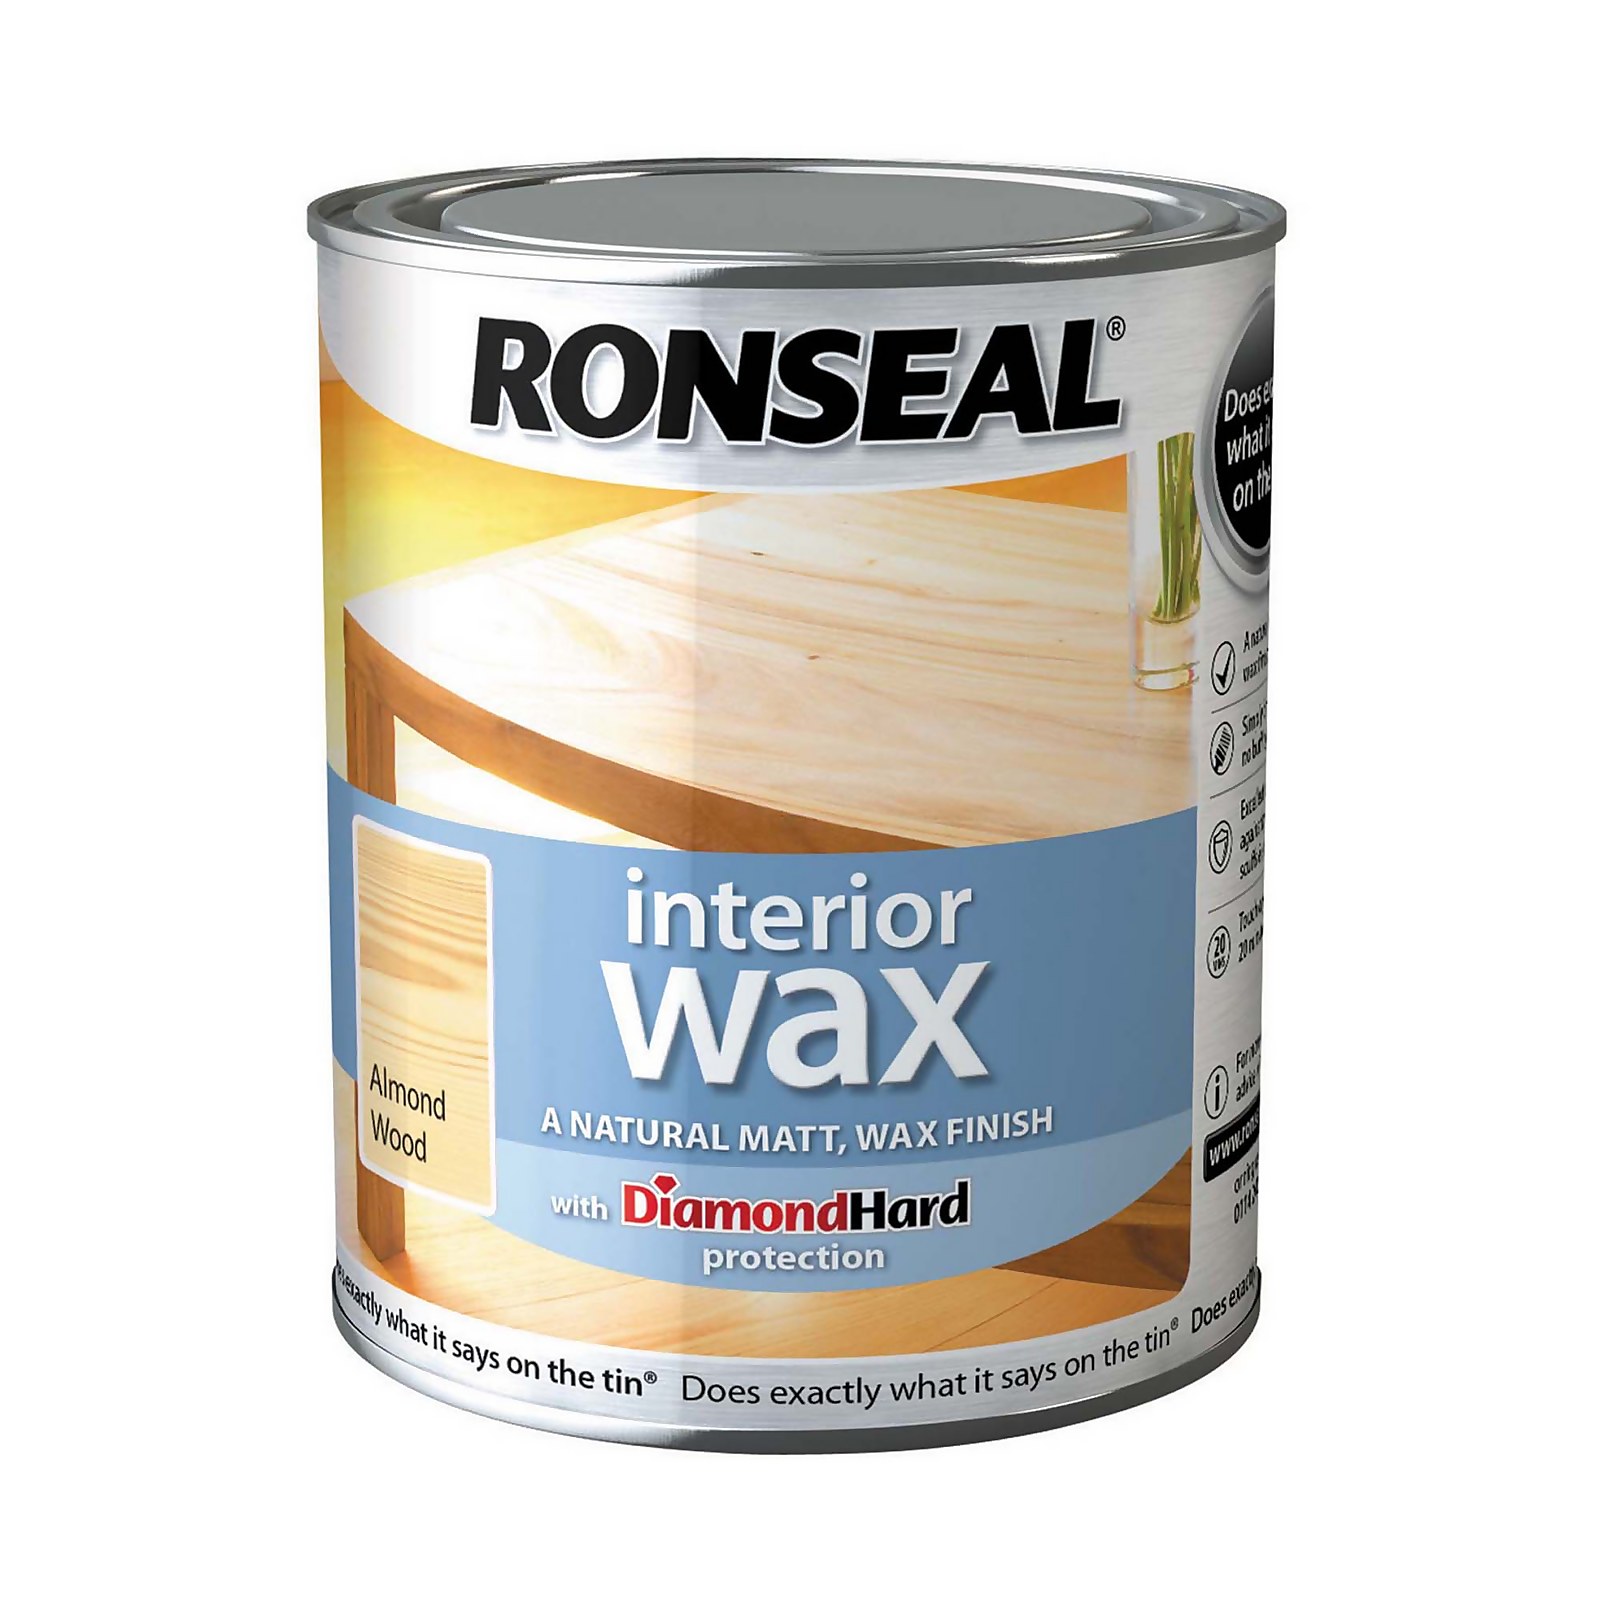 Photo of Ronseal Performance Wax - Almond Wood - 750ml